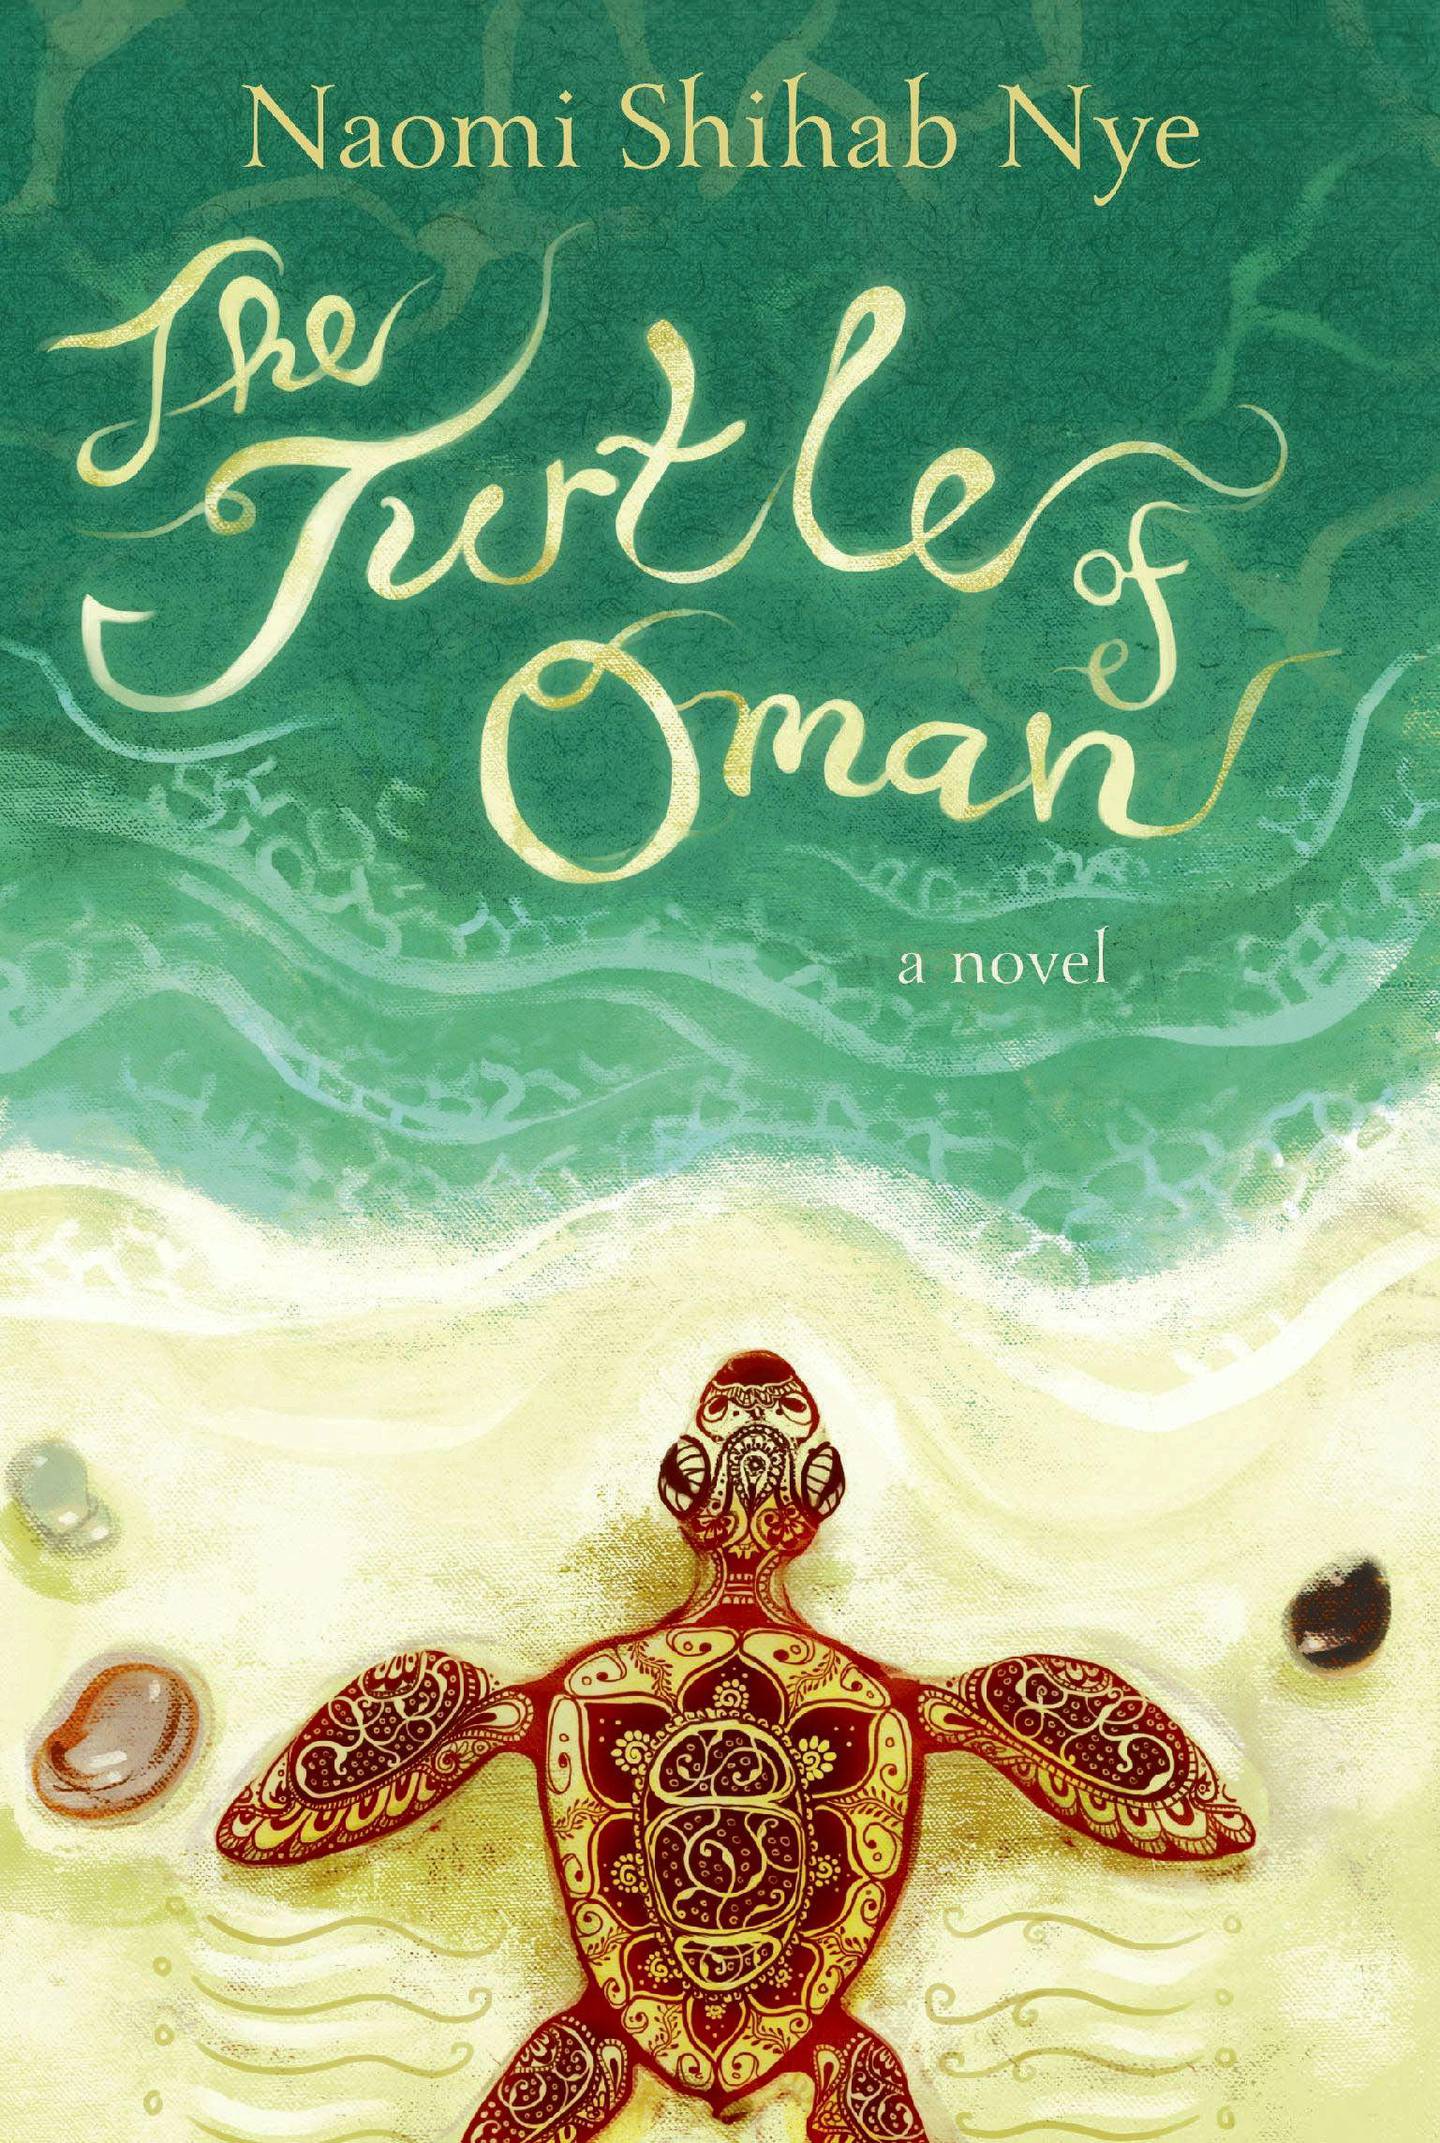 The Turtle of Oman: A Novel by Naomi Shihab Nye published by Greenwillow Books. Courtesy HarperCollins